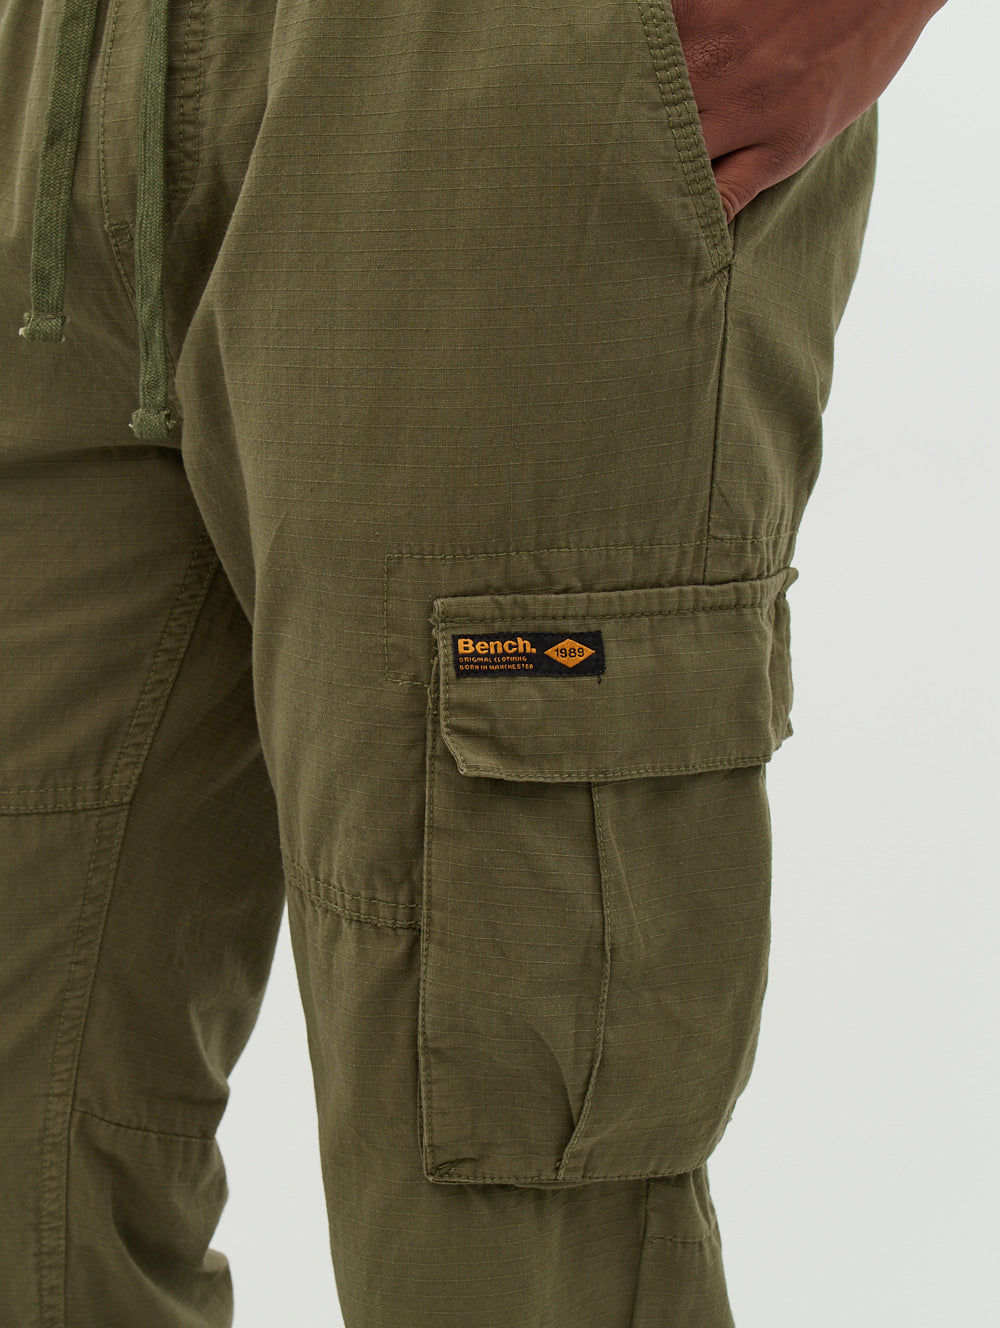 Cargo Division Field Pant - Anthracite